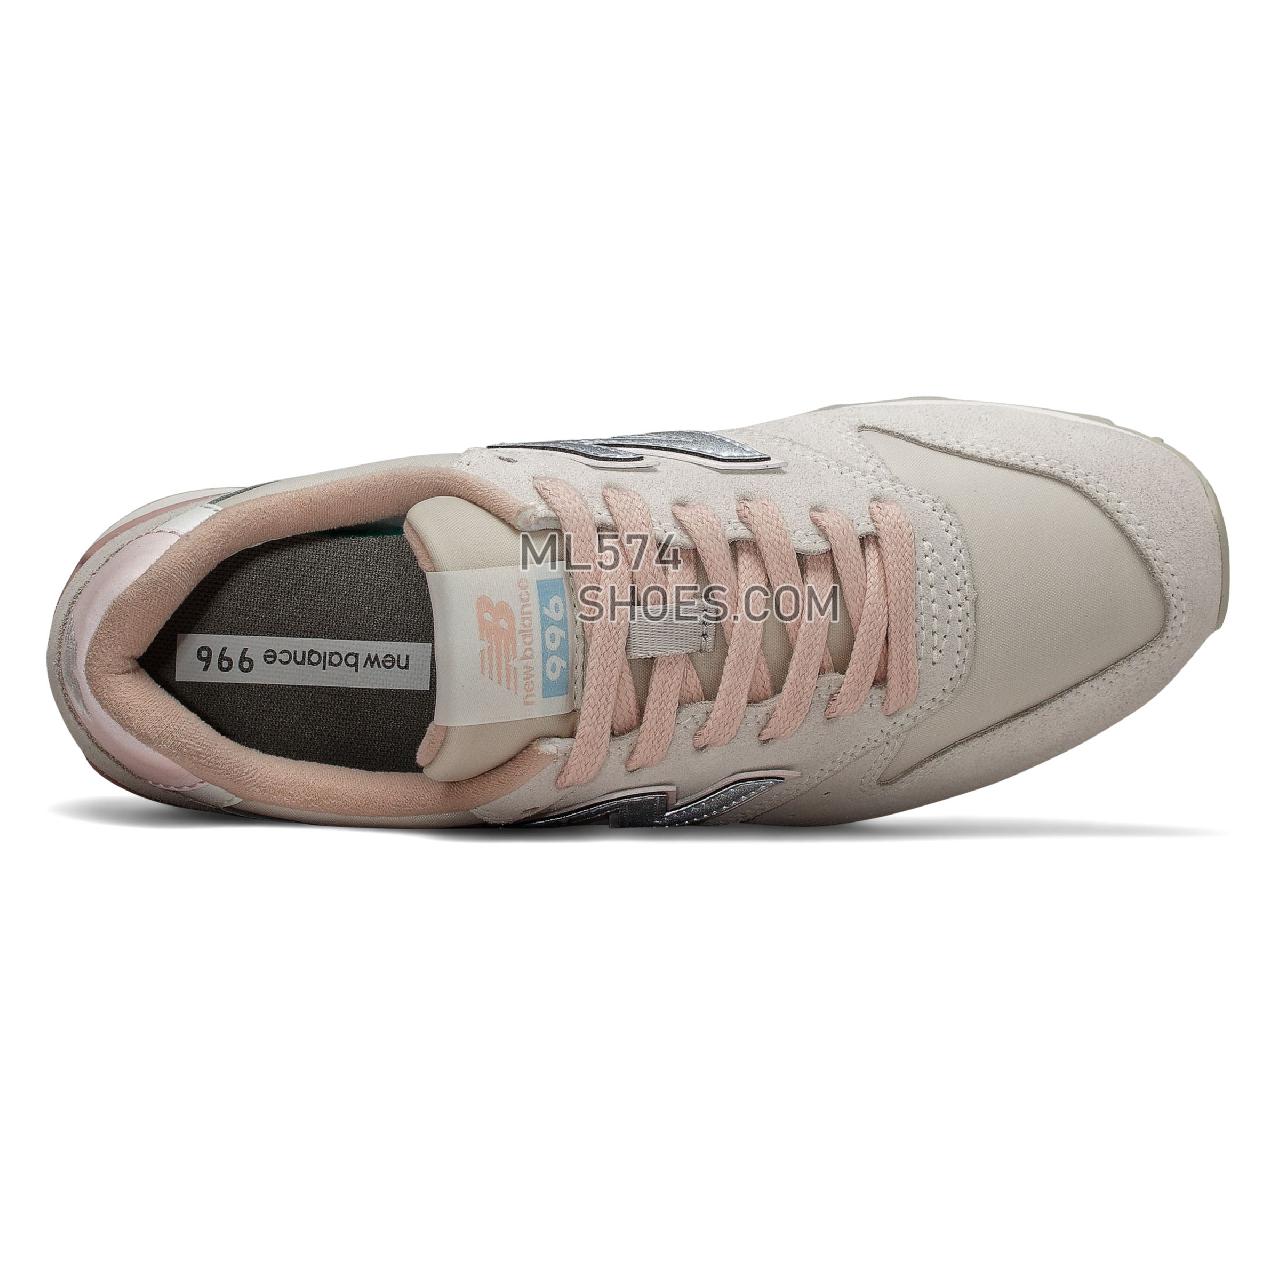 New Balance 996 - Women's Classic Sneakers - Oyster with White Oak - WL996AA